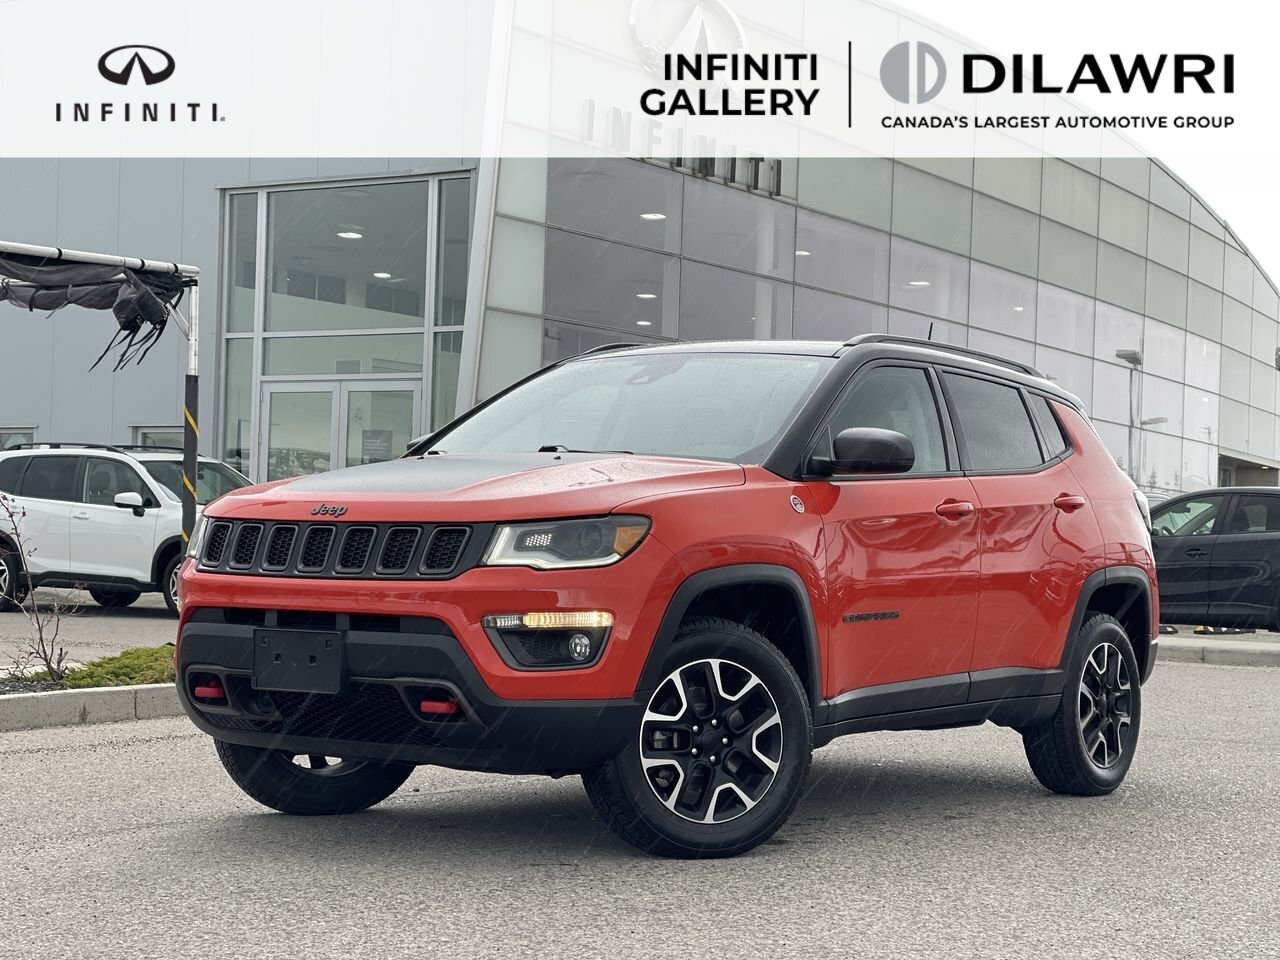 2021 Jeep Compass 4x4 Trailhawk (Leather|Nav|Pano Roof|Remote Start)